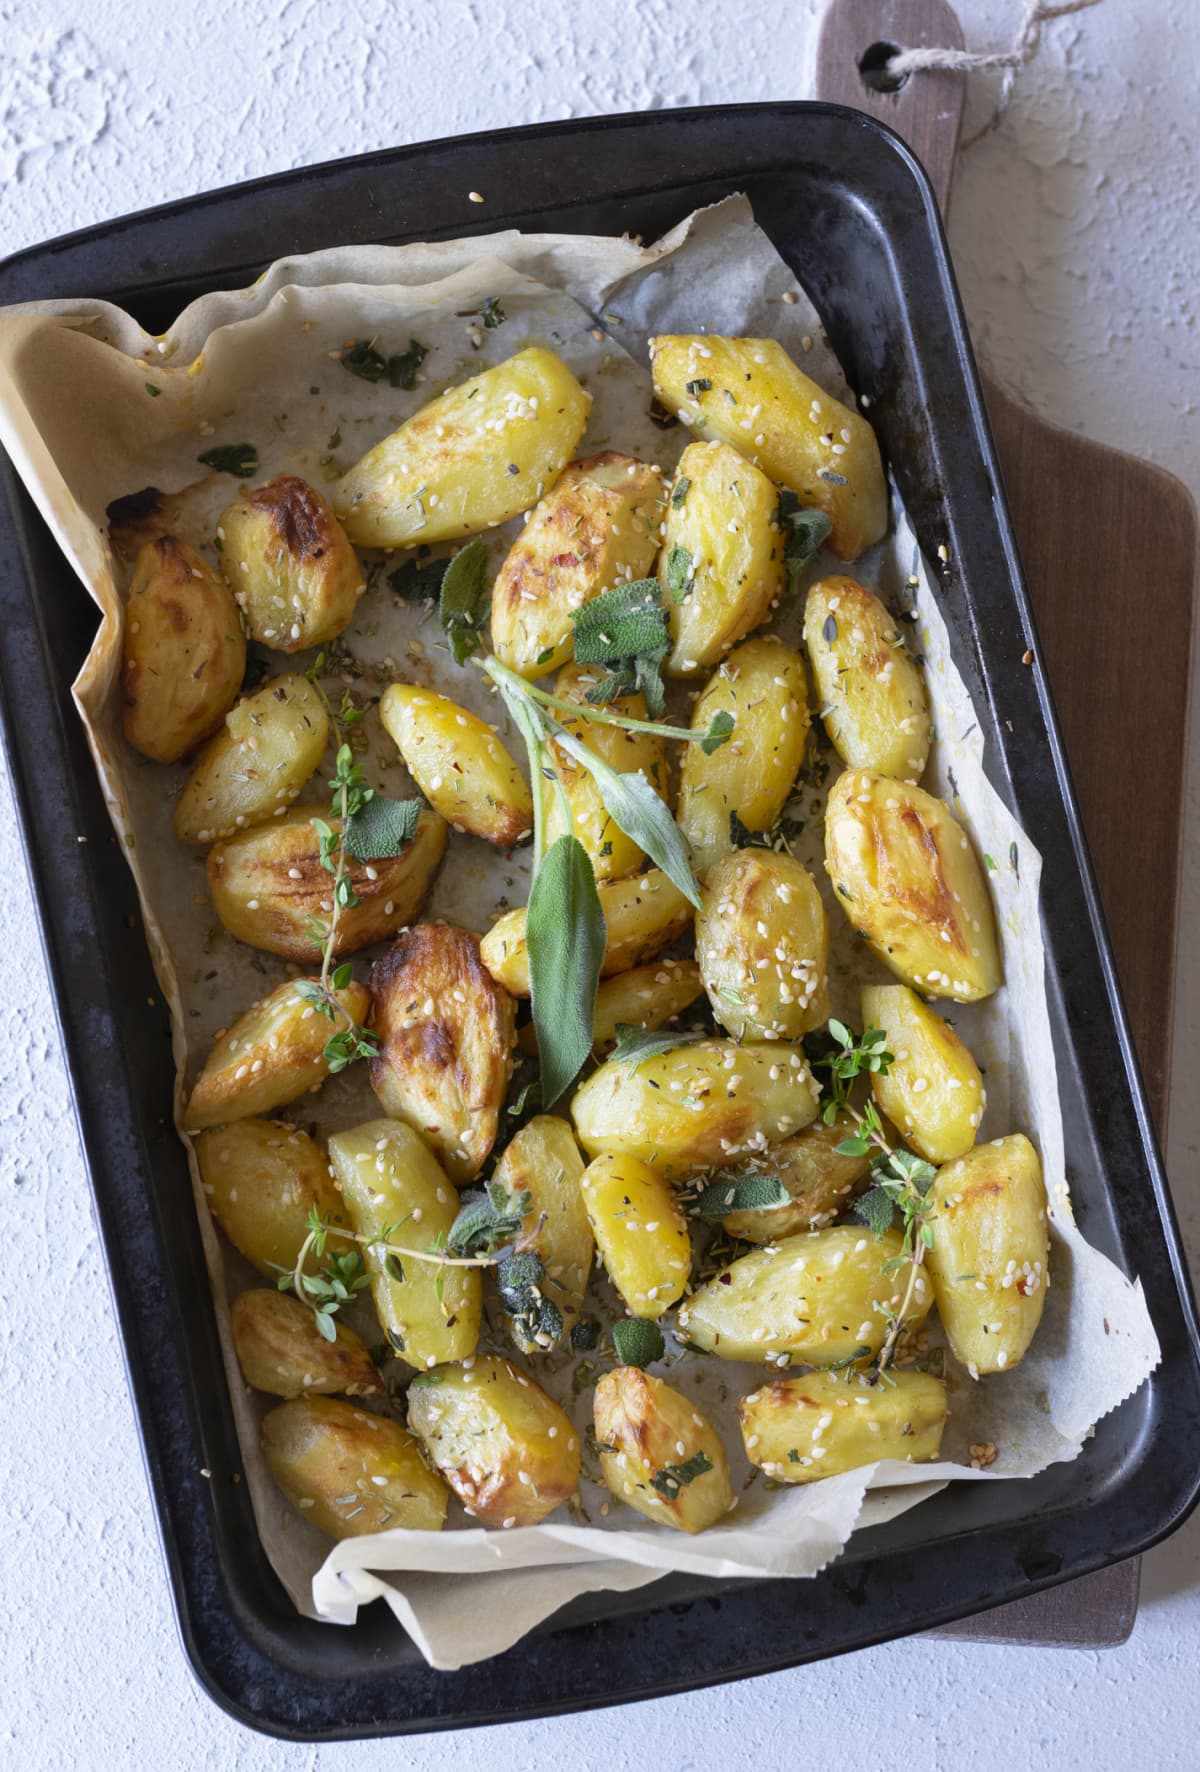 Roasted potatoes in a baking dish with fresh herbs